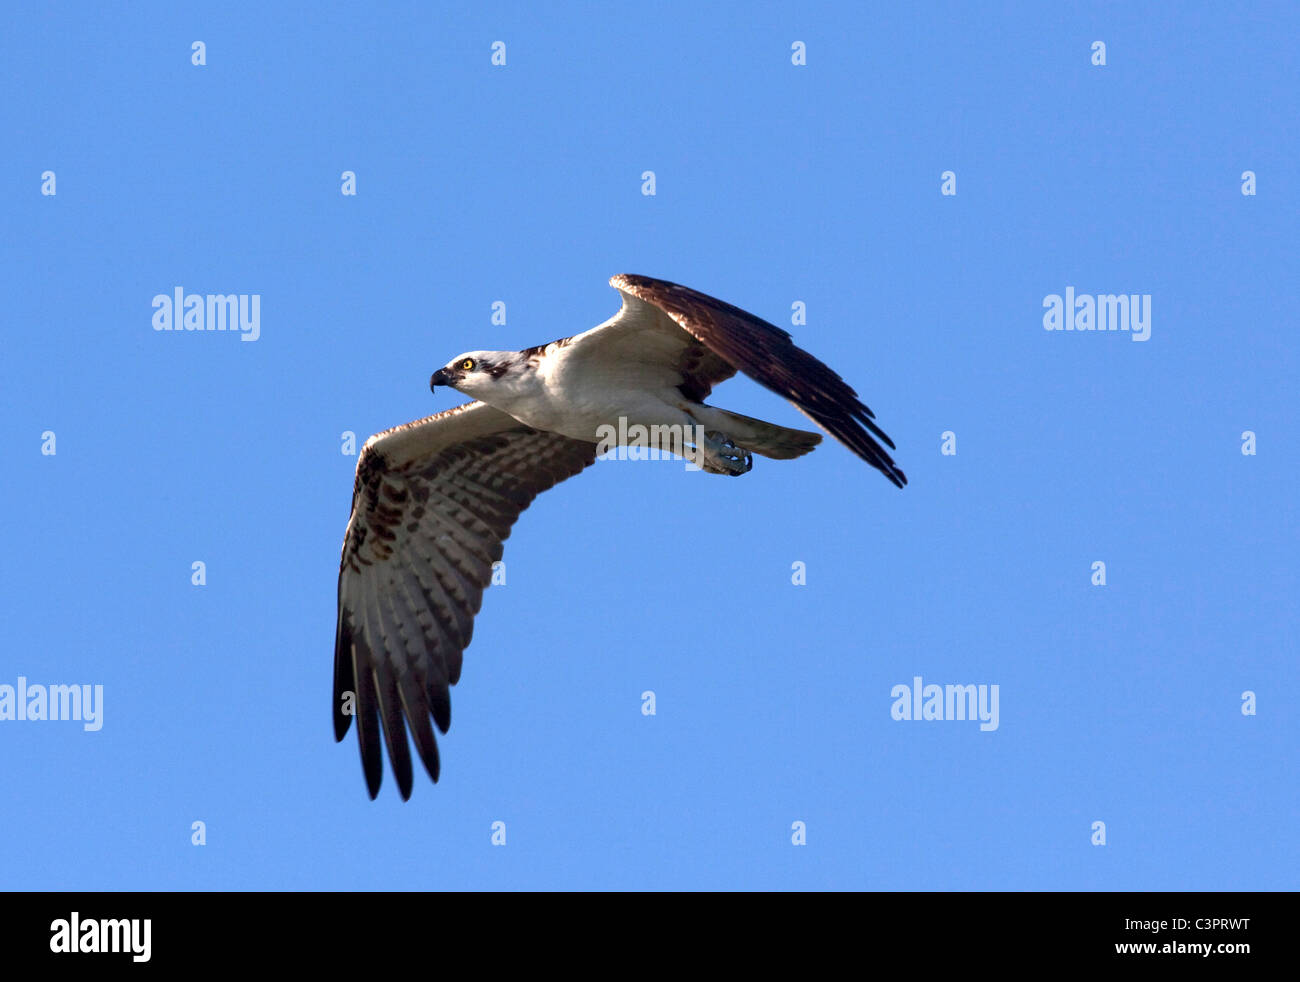 An osprey (Pandion haliaetus) flies above in search of food in Cuba. Stock Photo